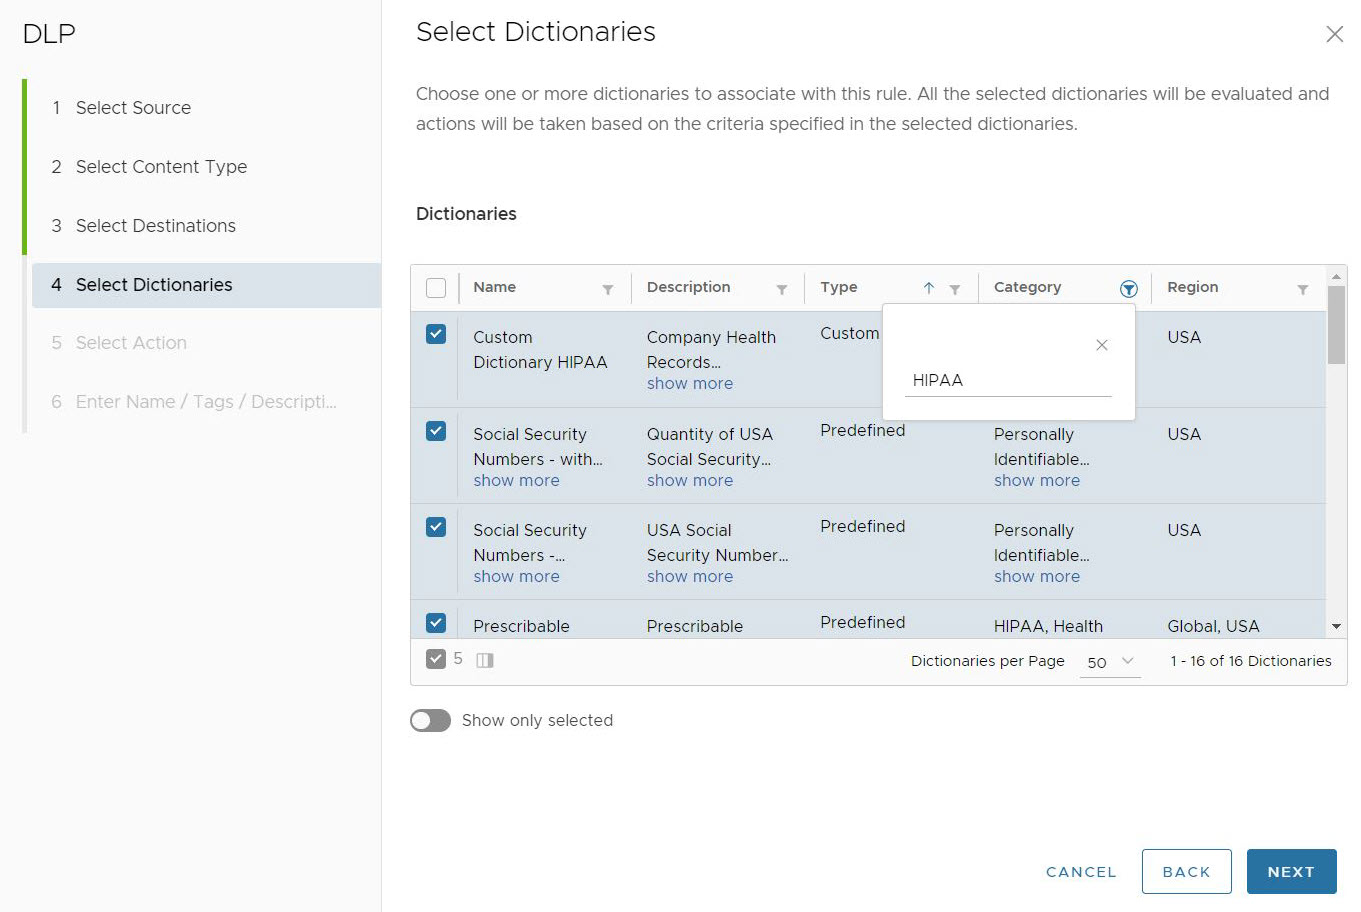 Filtering for Dictionaries using the Category search term HIPAA.